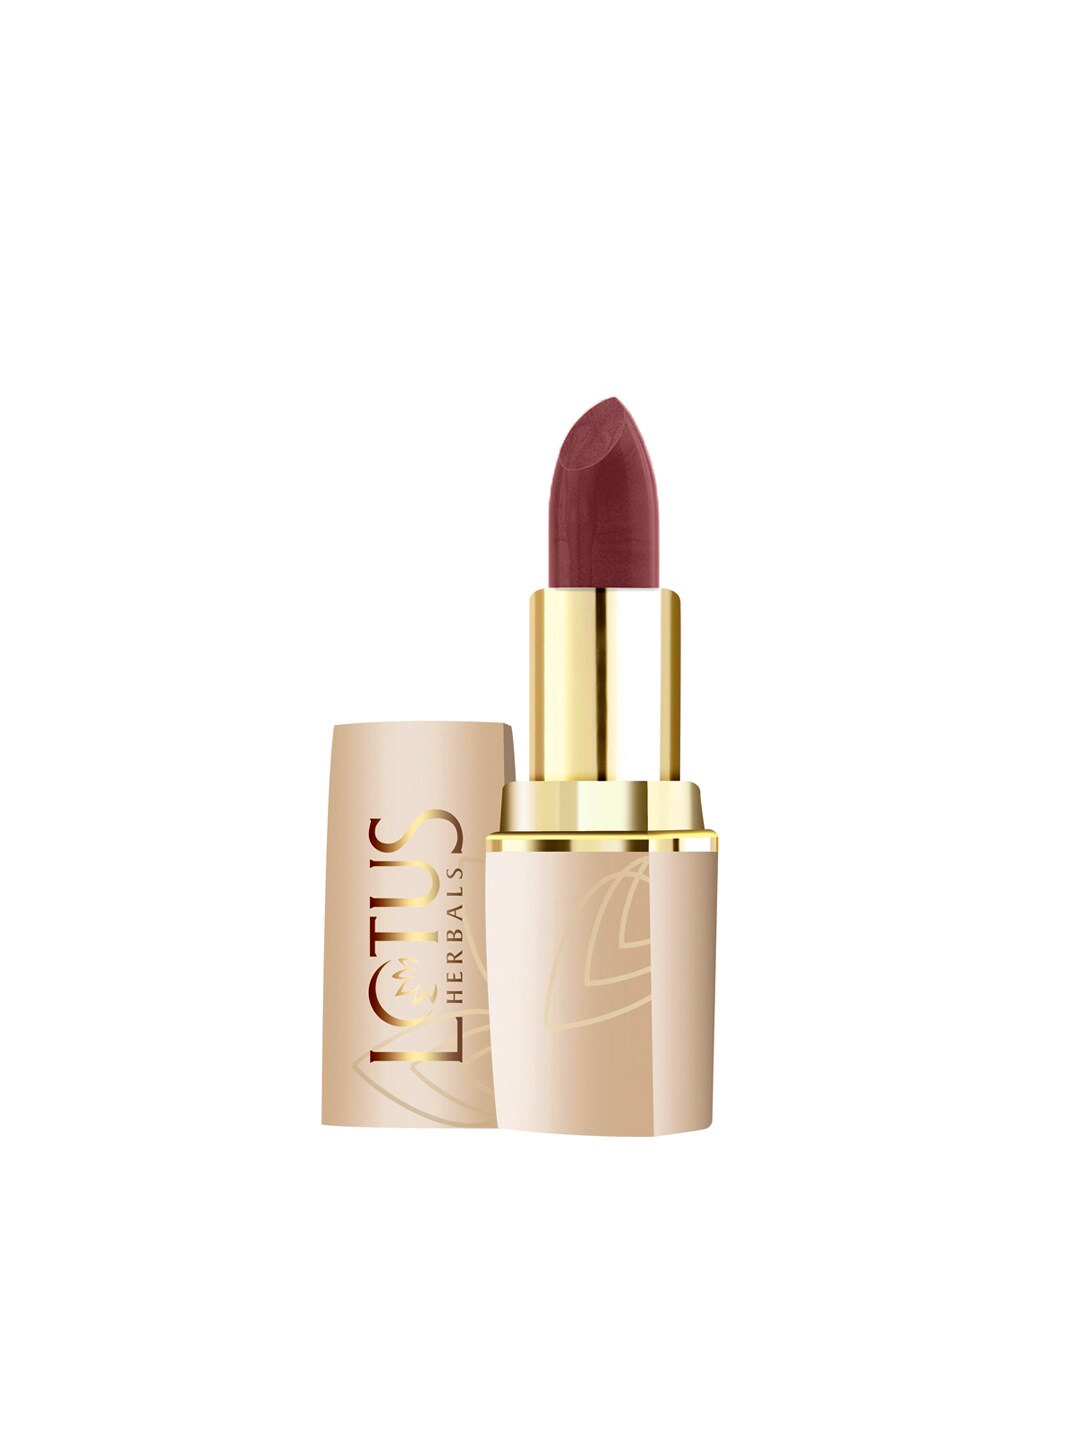 Lotus Herbals Pure Colours Red Rose Lipstick 612